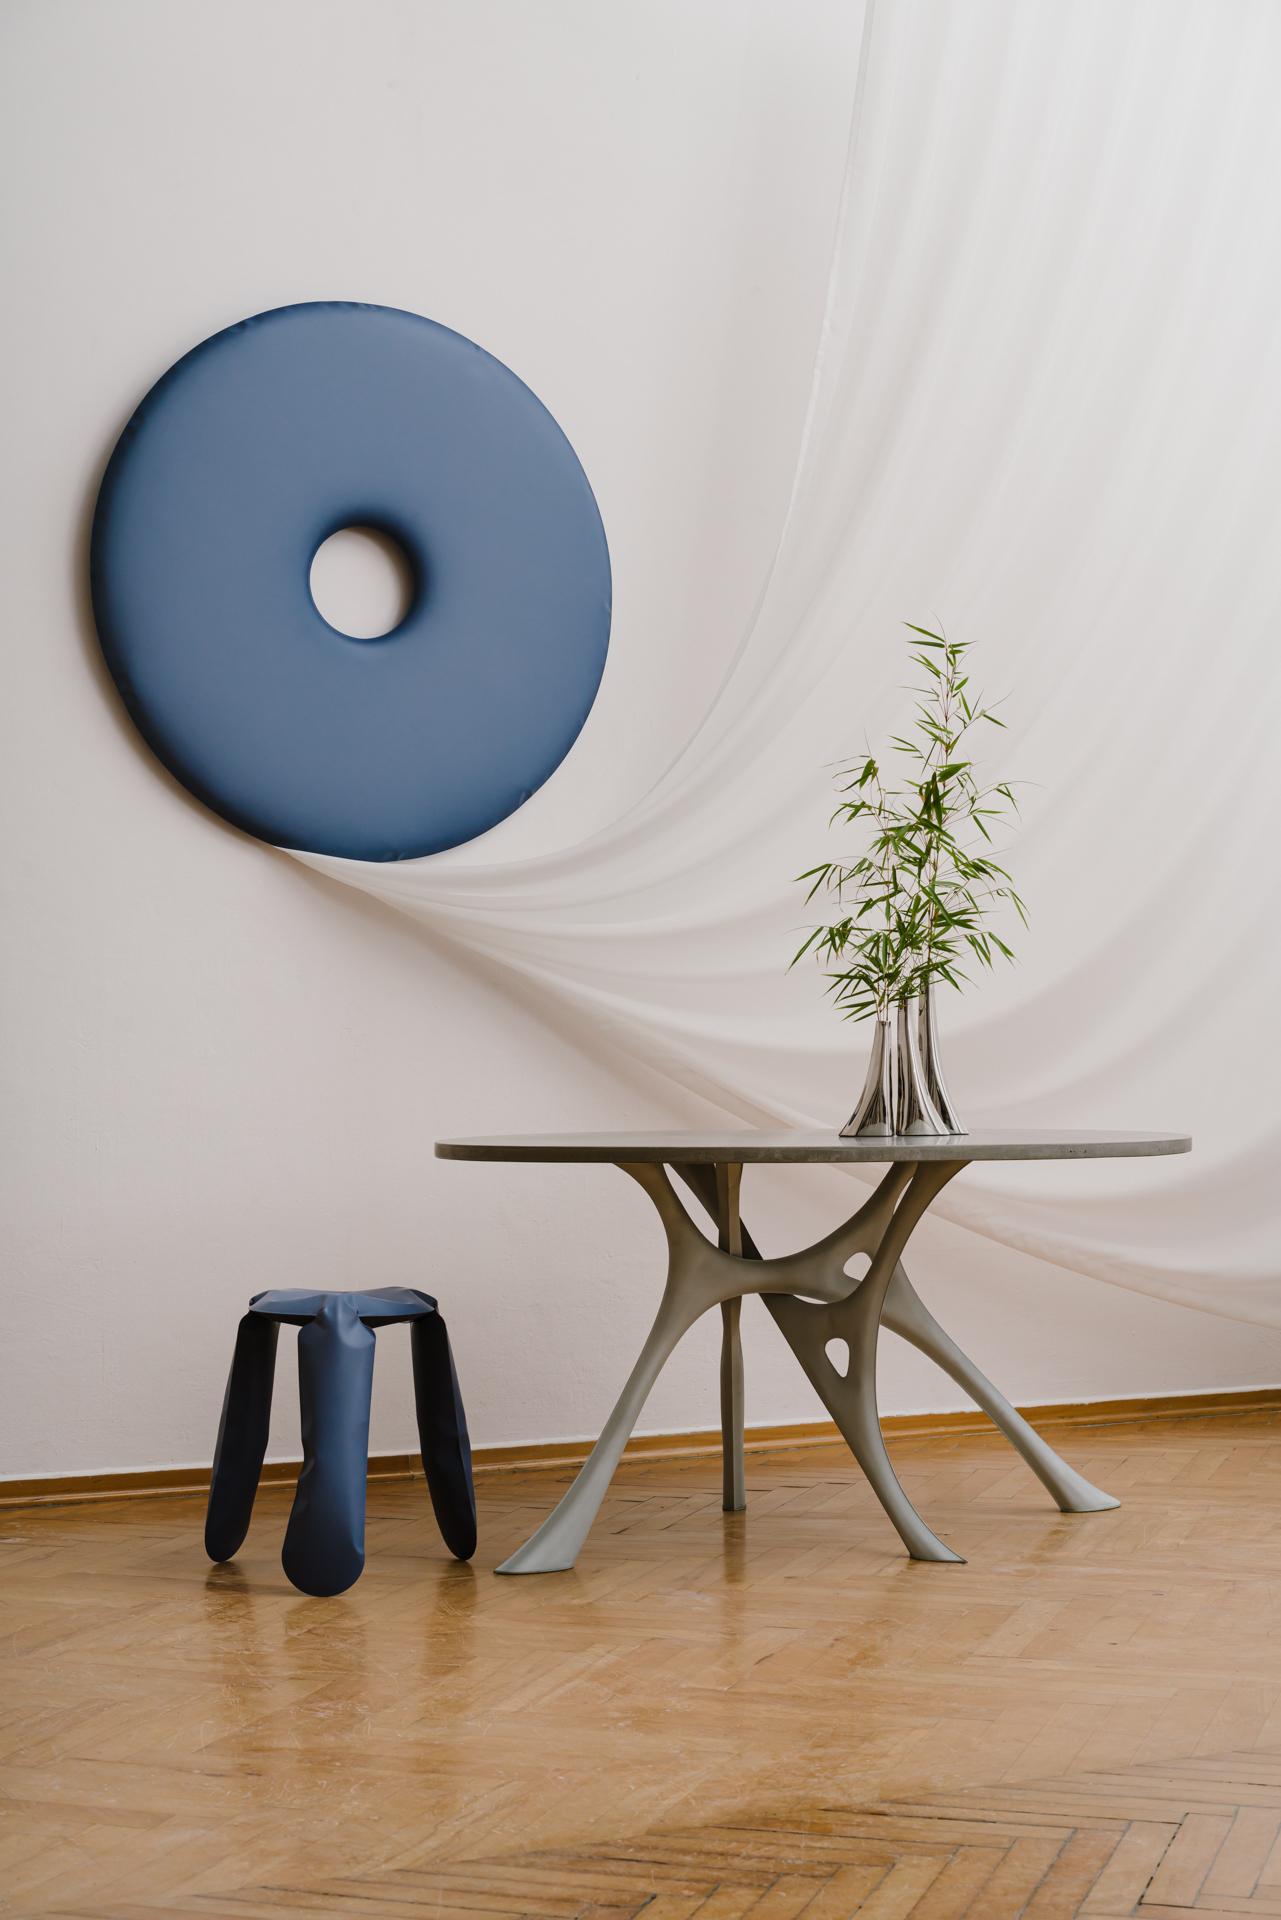 Round Table 'Morph' by Zieta

top: concrete
base: steel 
Dimensions. H: 74 cm W: 150 cm L: 120 cm

The MORPH table takes inspiration from the changing yet always optimized geometry of tree branches. Similar to organic forms flowing and